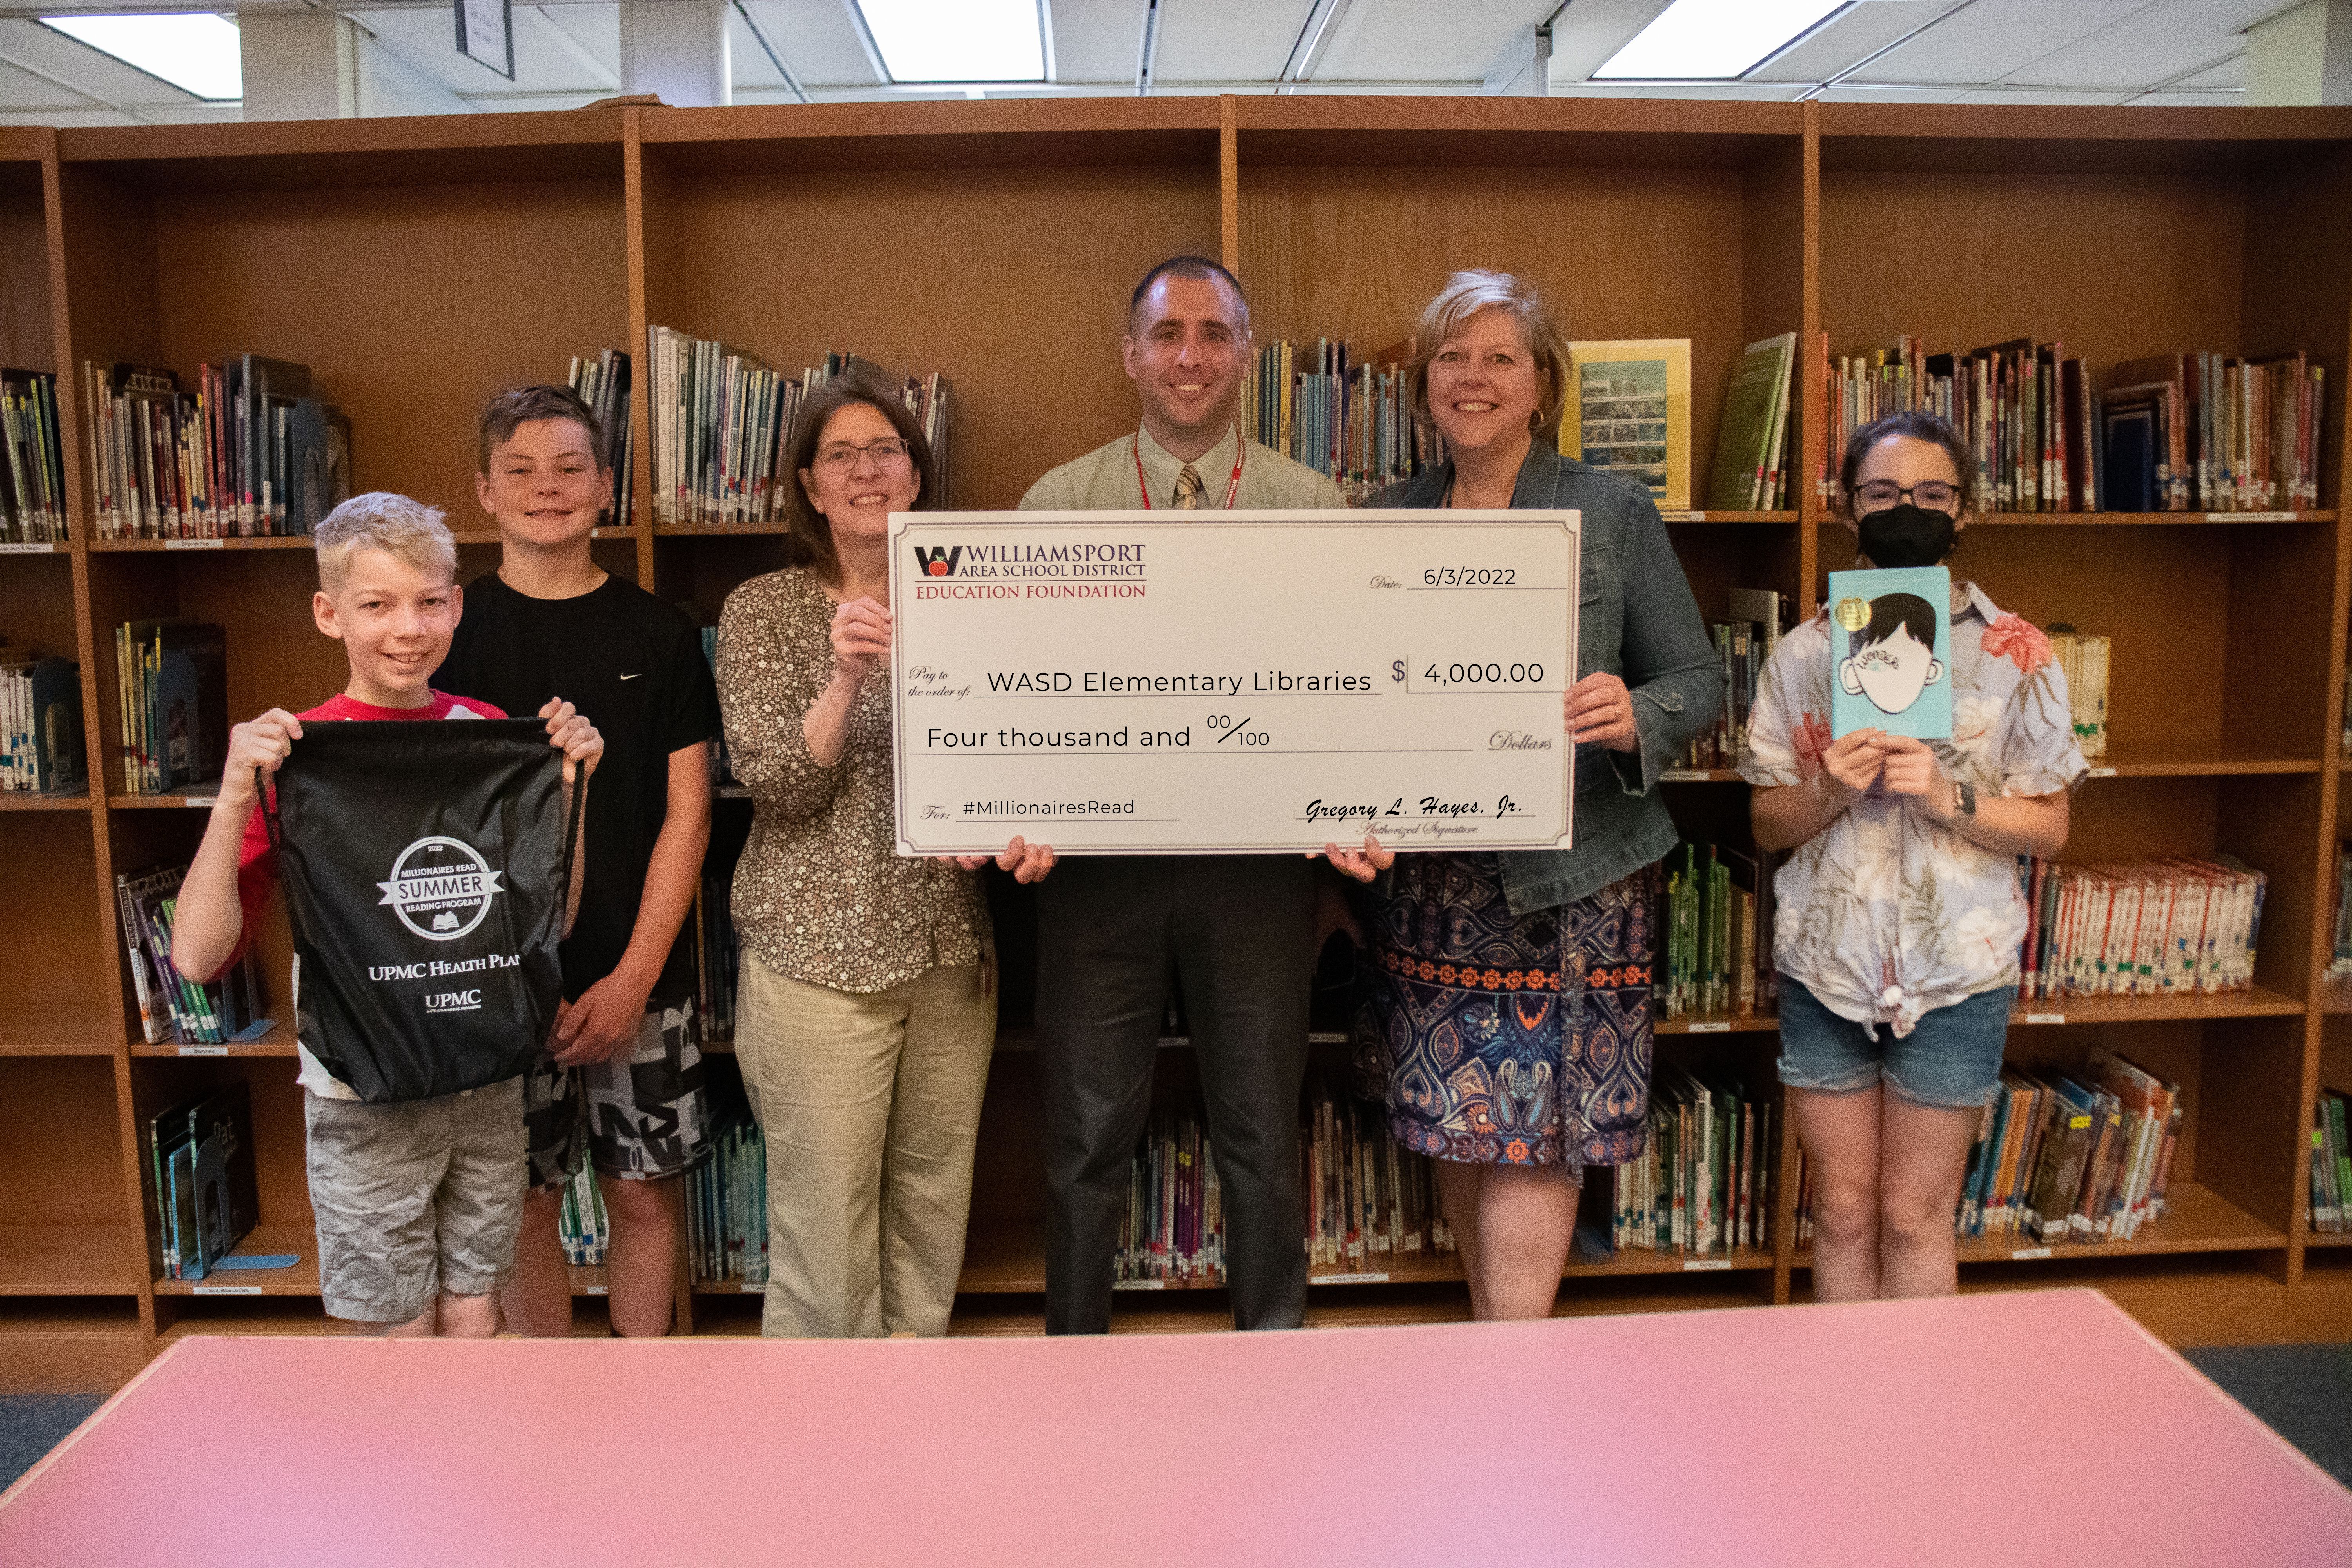 The library system is presented with a check for $4,000.